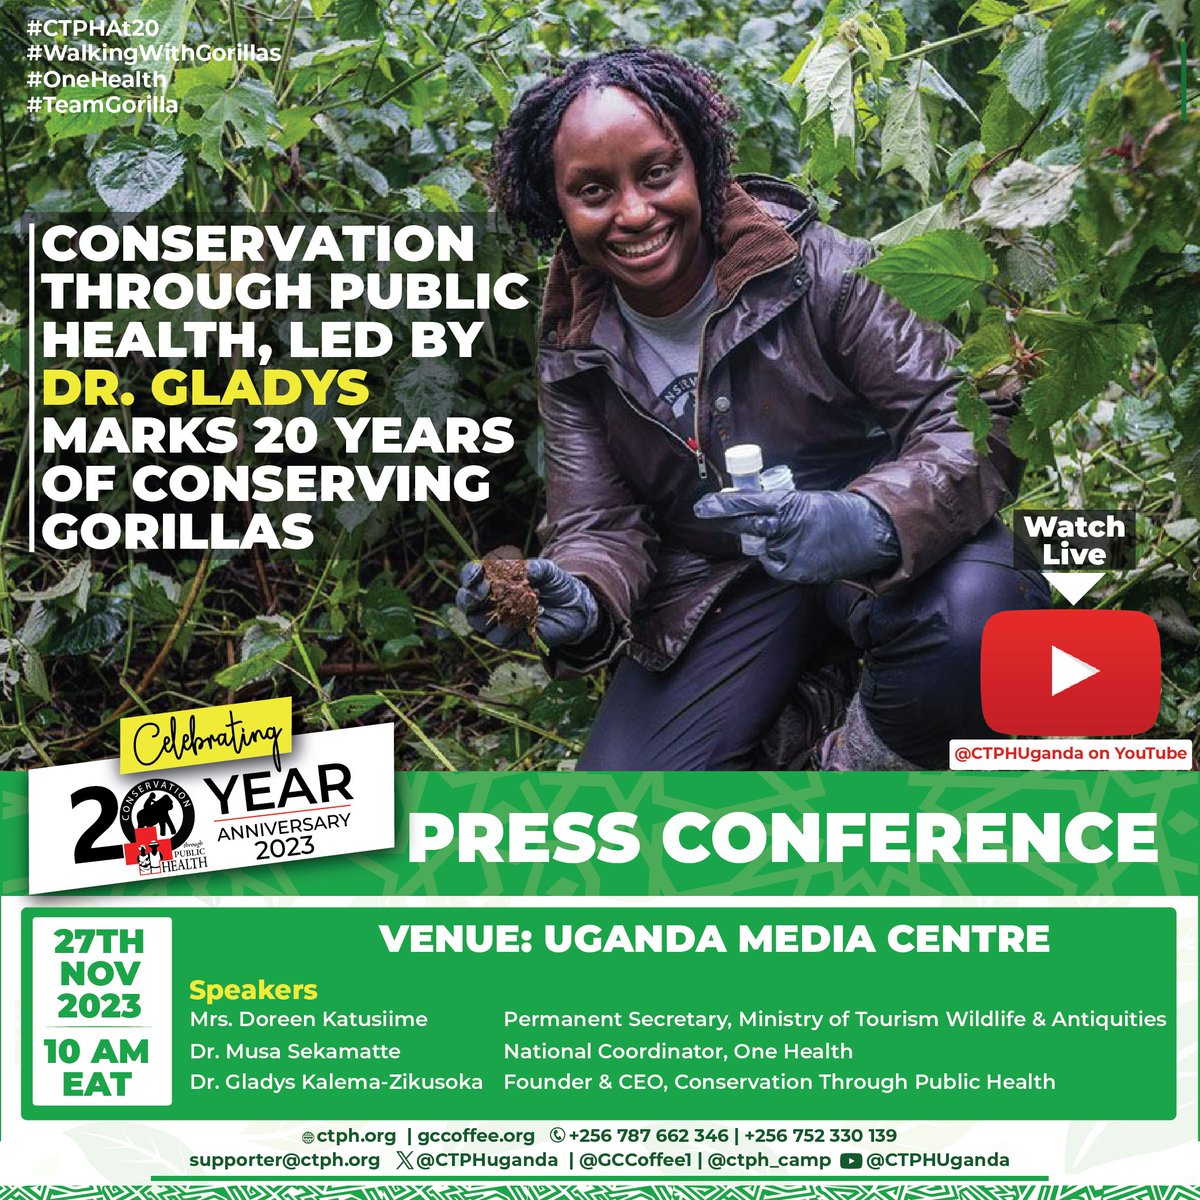 Join us this Monday 27TH NOV 2023 at 10 AM EAT on all our social media platforms and our YouTube Channel youtube.com/@CTPHUganda as we hold the #CTPHAt20 Press Conference live from @UgandaMediaCent. #CTPHAt20 #OneHealth #WalkingWithGorillas #TeamGorilla